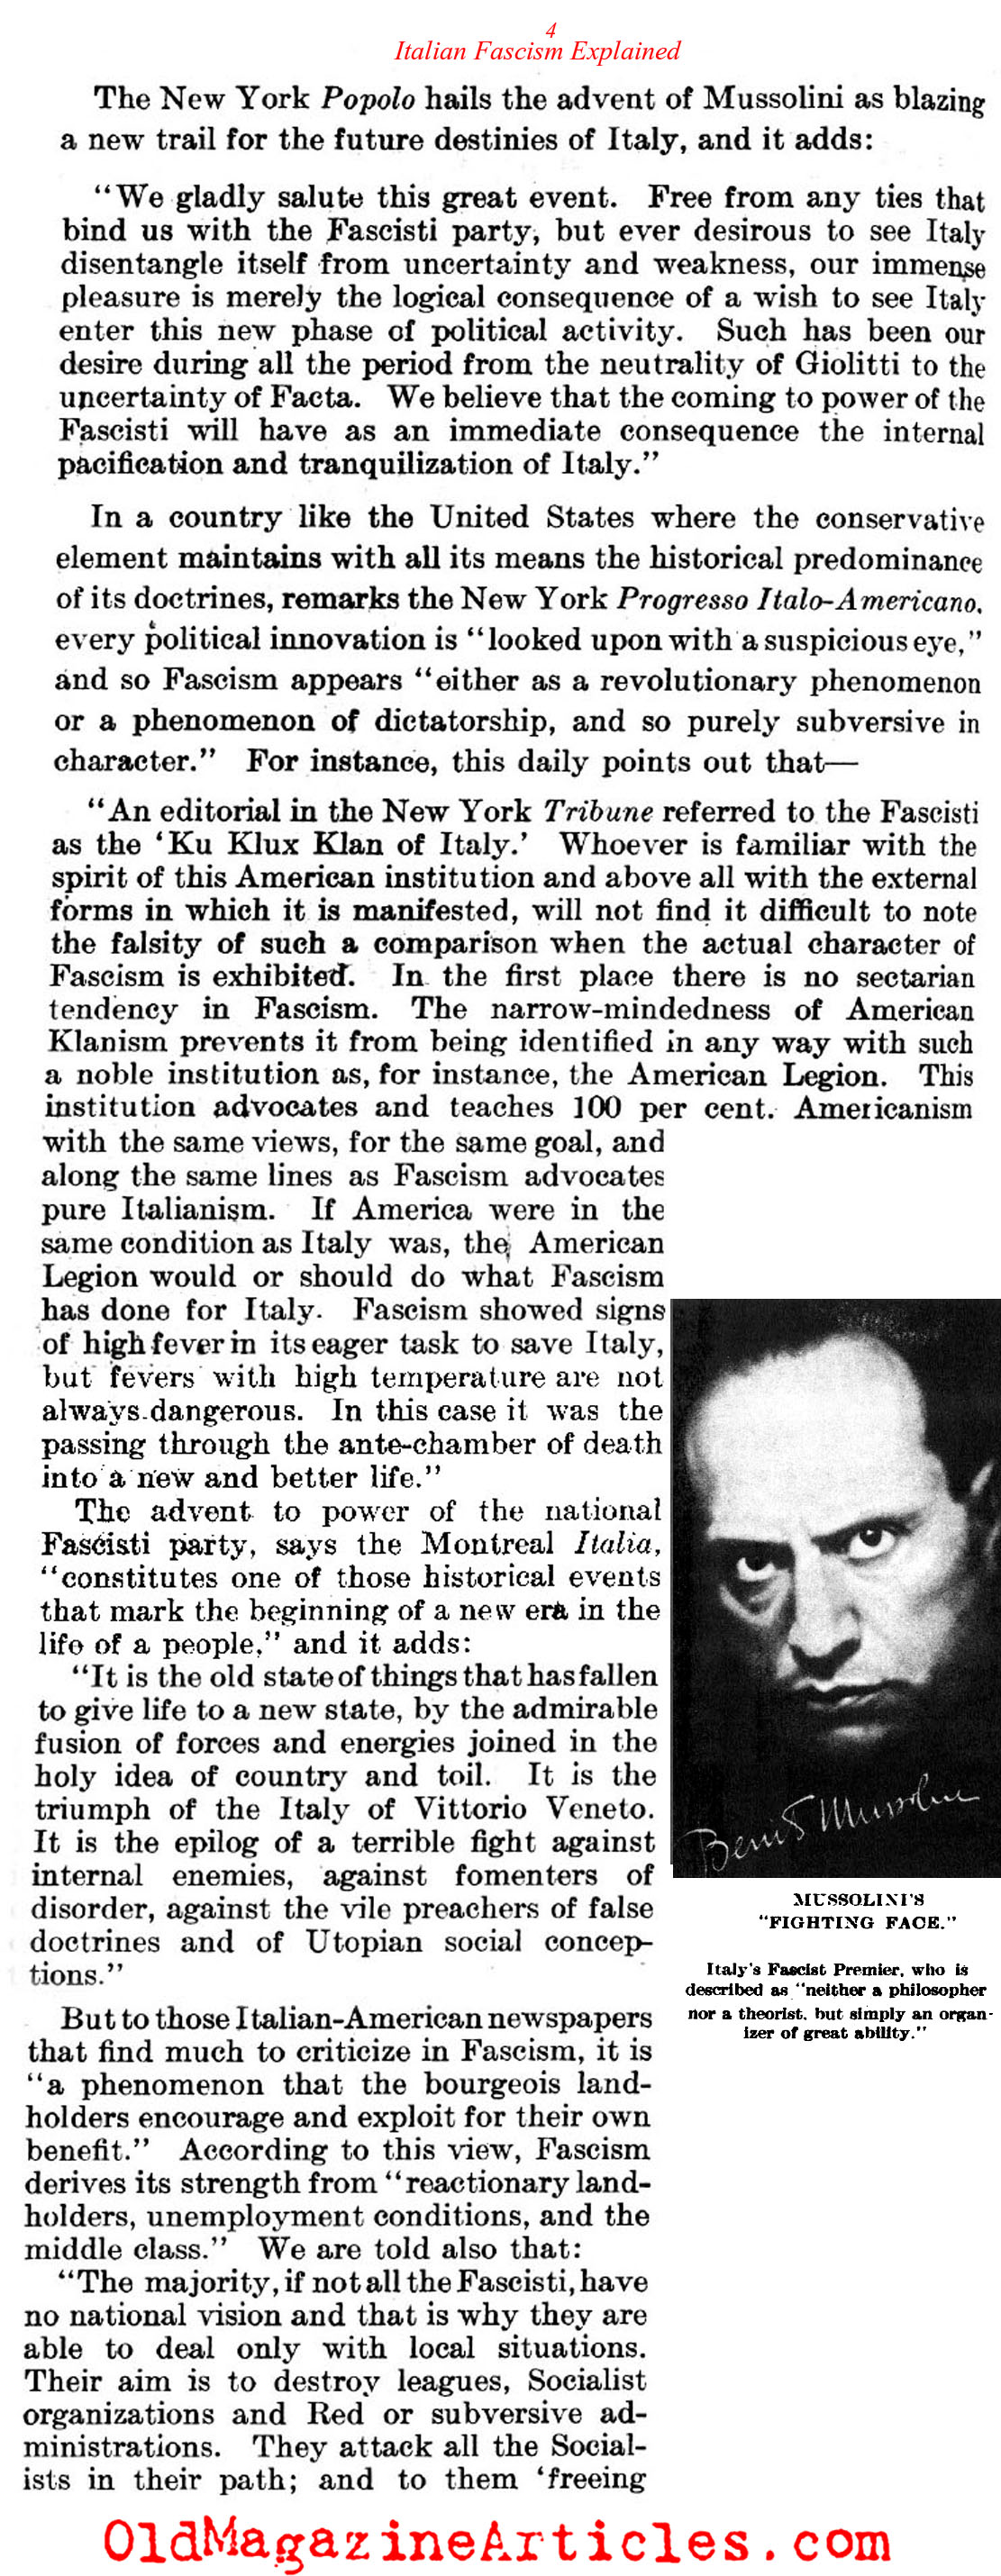 Fascism's Triumph Explained by Italian-American Journalists (Literary Digest, 1922)